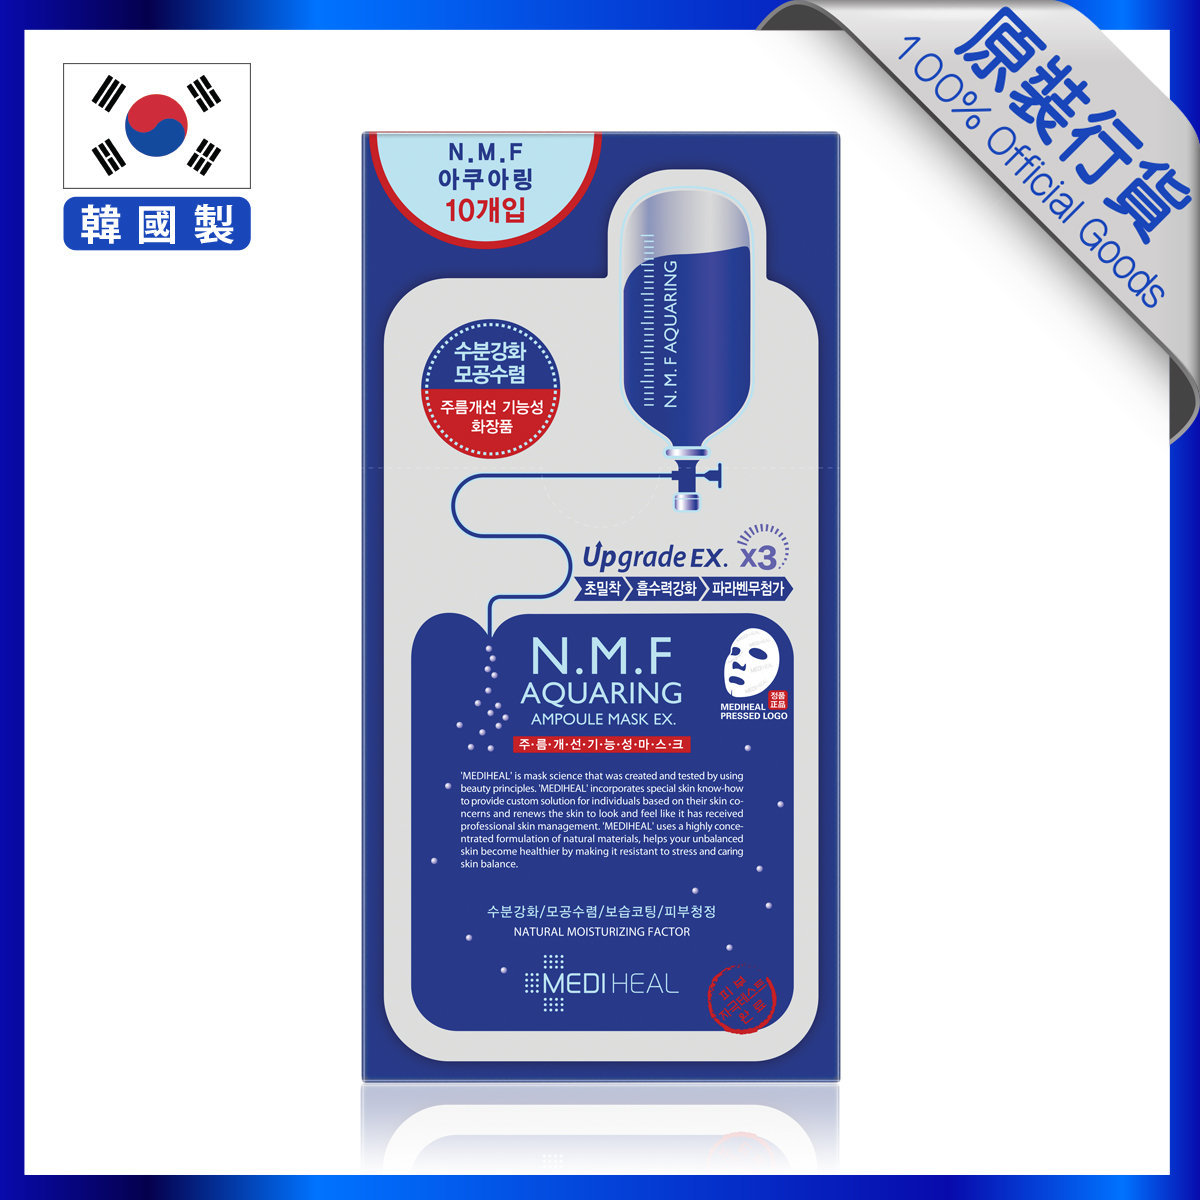 Korea Direct - N.M.F Aquaring Ampoule Mask EX.（10 Pieces) (Hong Kong Official Product)